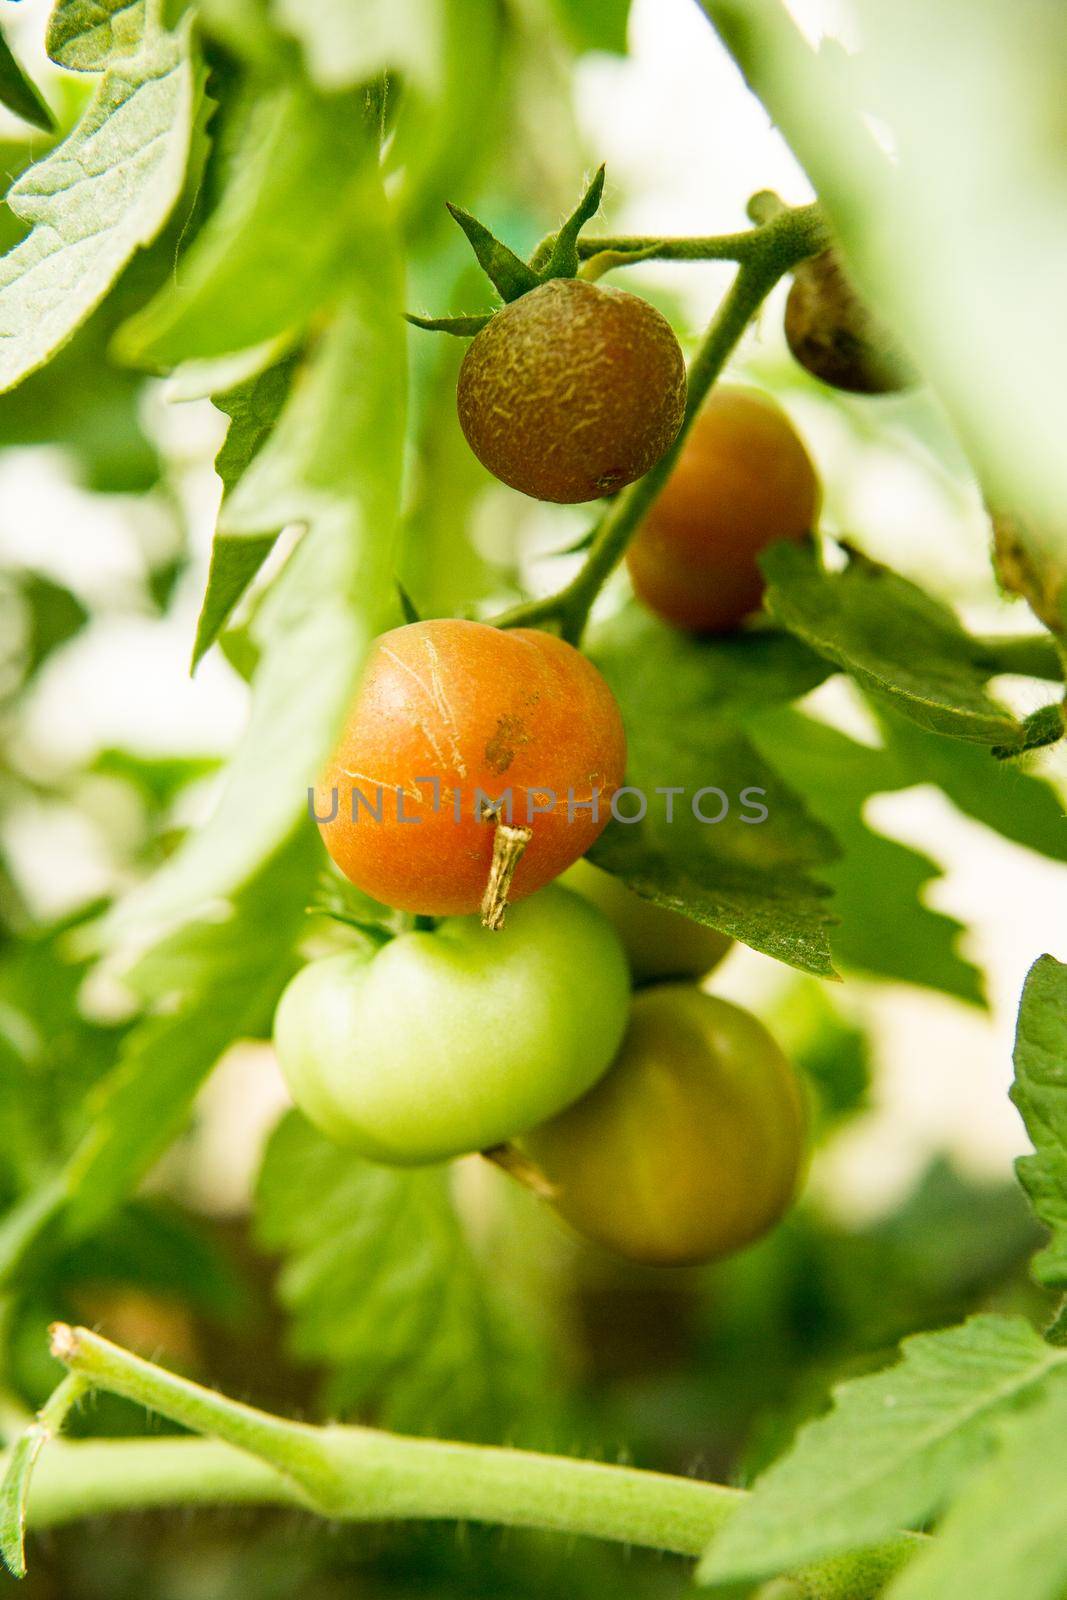 Tomatoes are hanging on a branch in the greenhouse. The concept of gardening and life in the country.